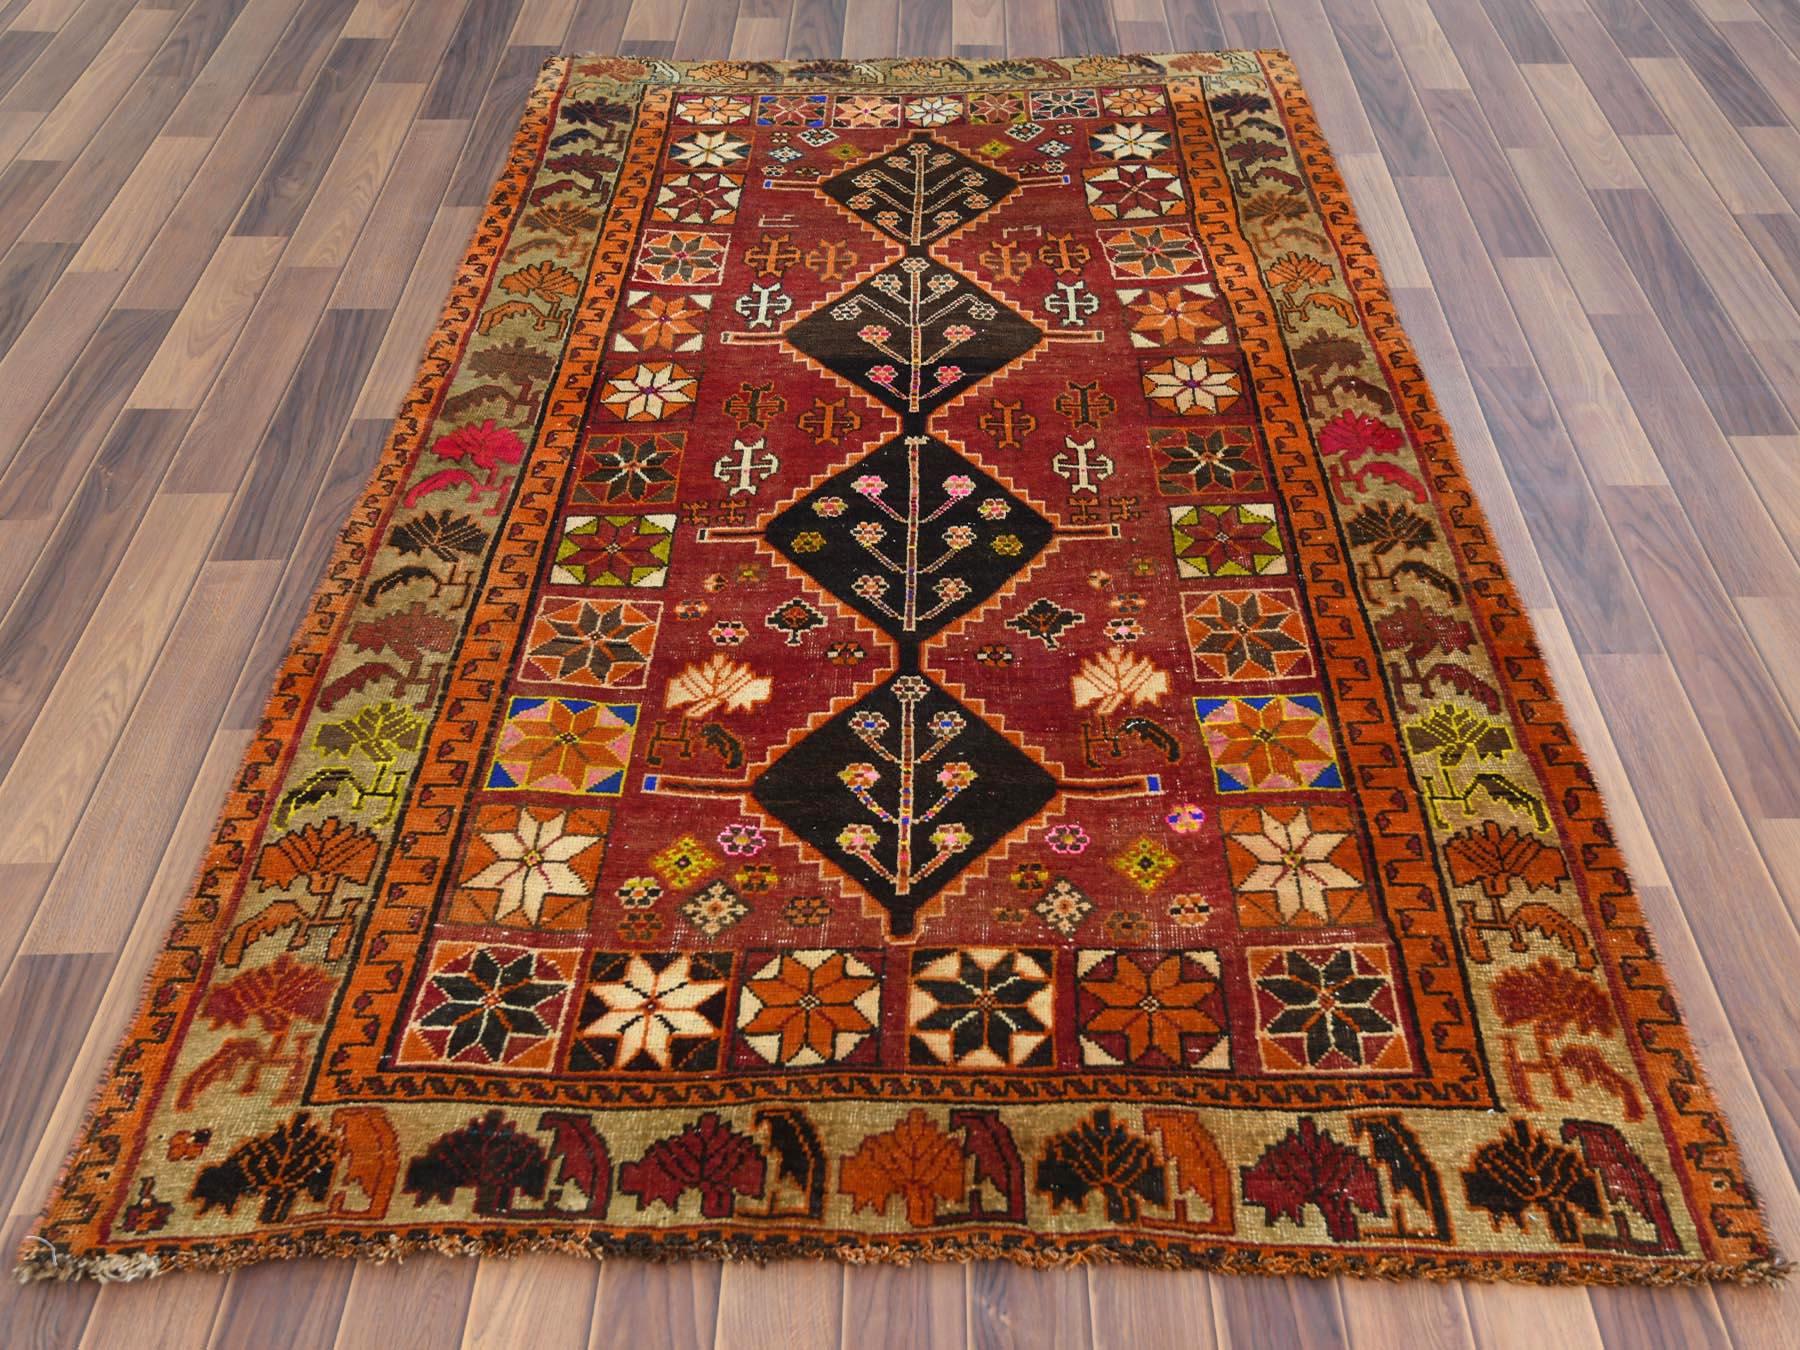 This fabulous hand-knotted carpet has been created and designed for extra strength and durability. This rug has been handcrafted for weeks in the traditional method that is used to make Rugs. This is truly a one-of-kind piece.

Exact rug size in